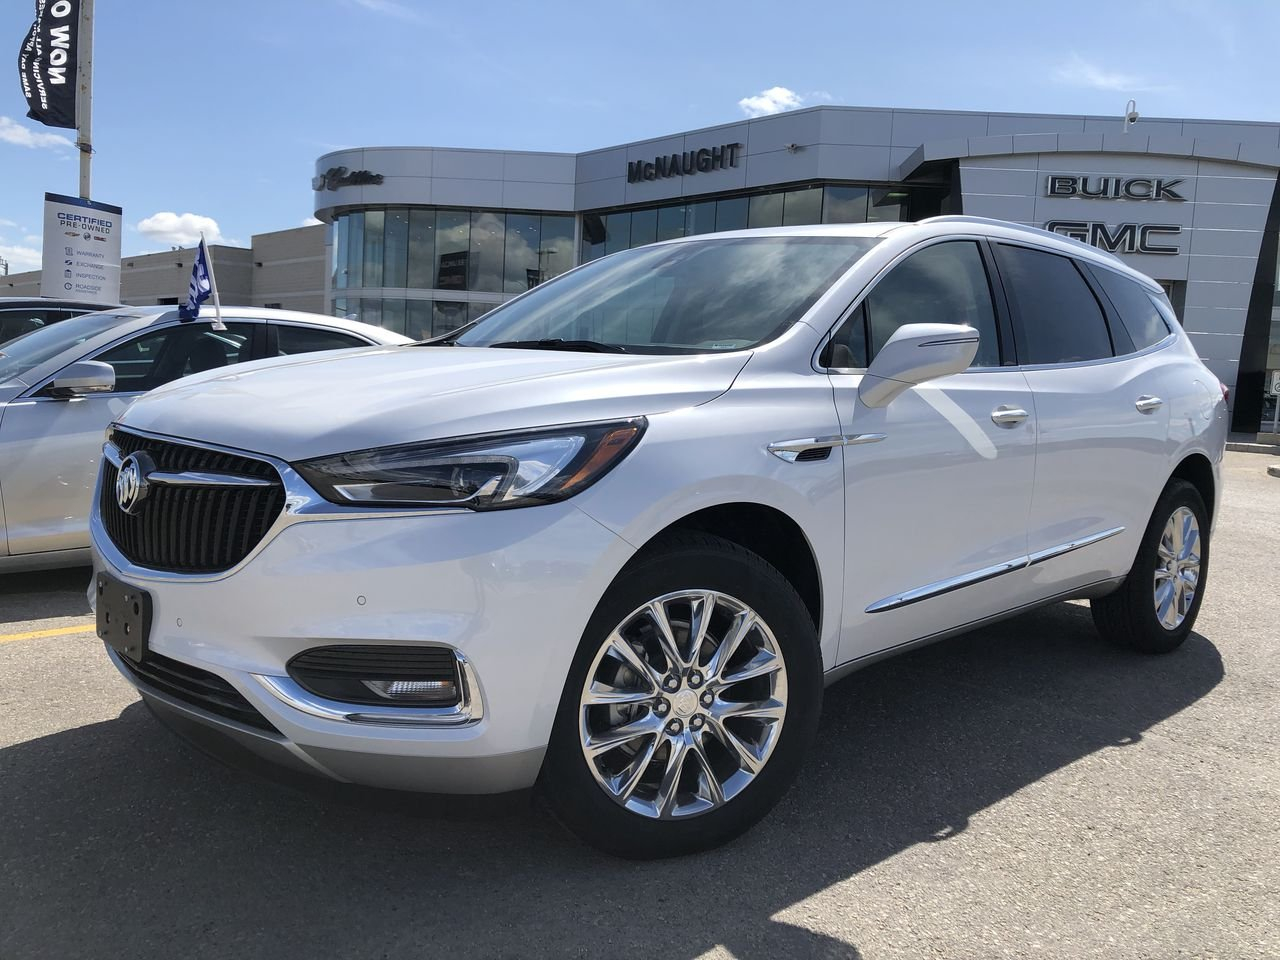 New 2022 Buick Enclave Length, Leather, Lease Price | 2021 ...